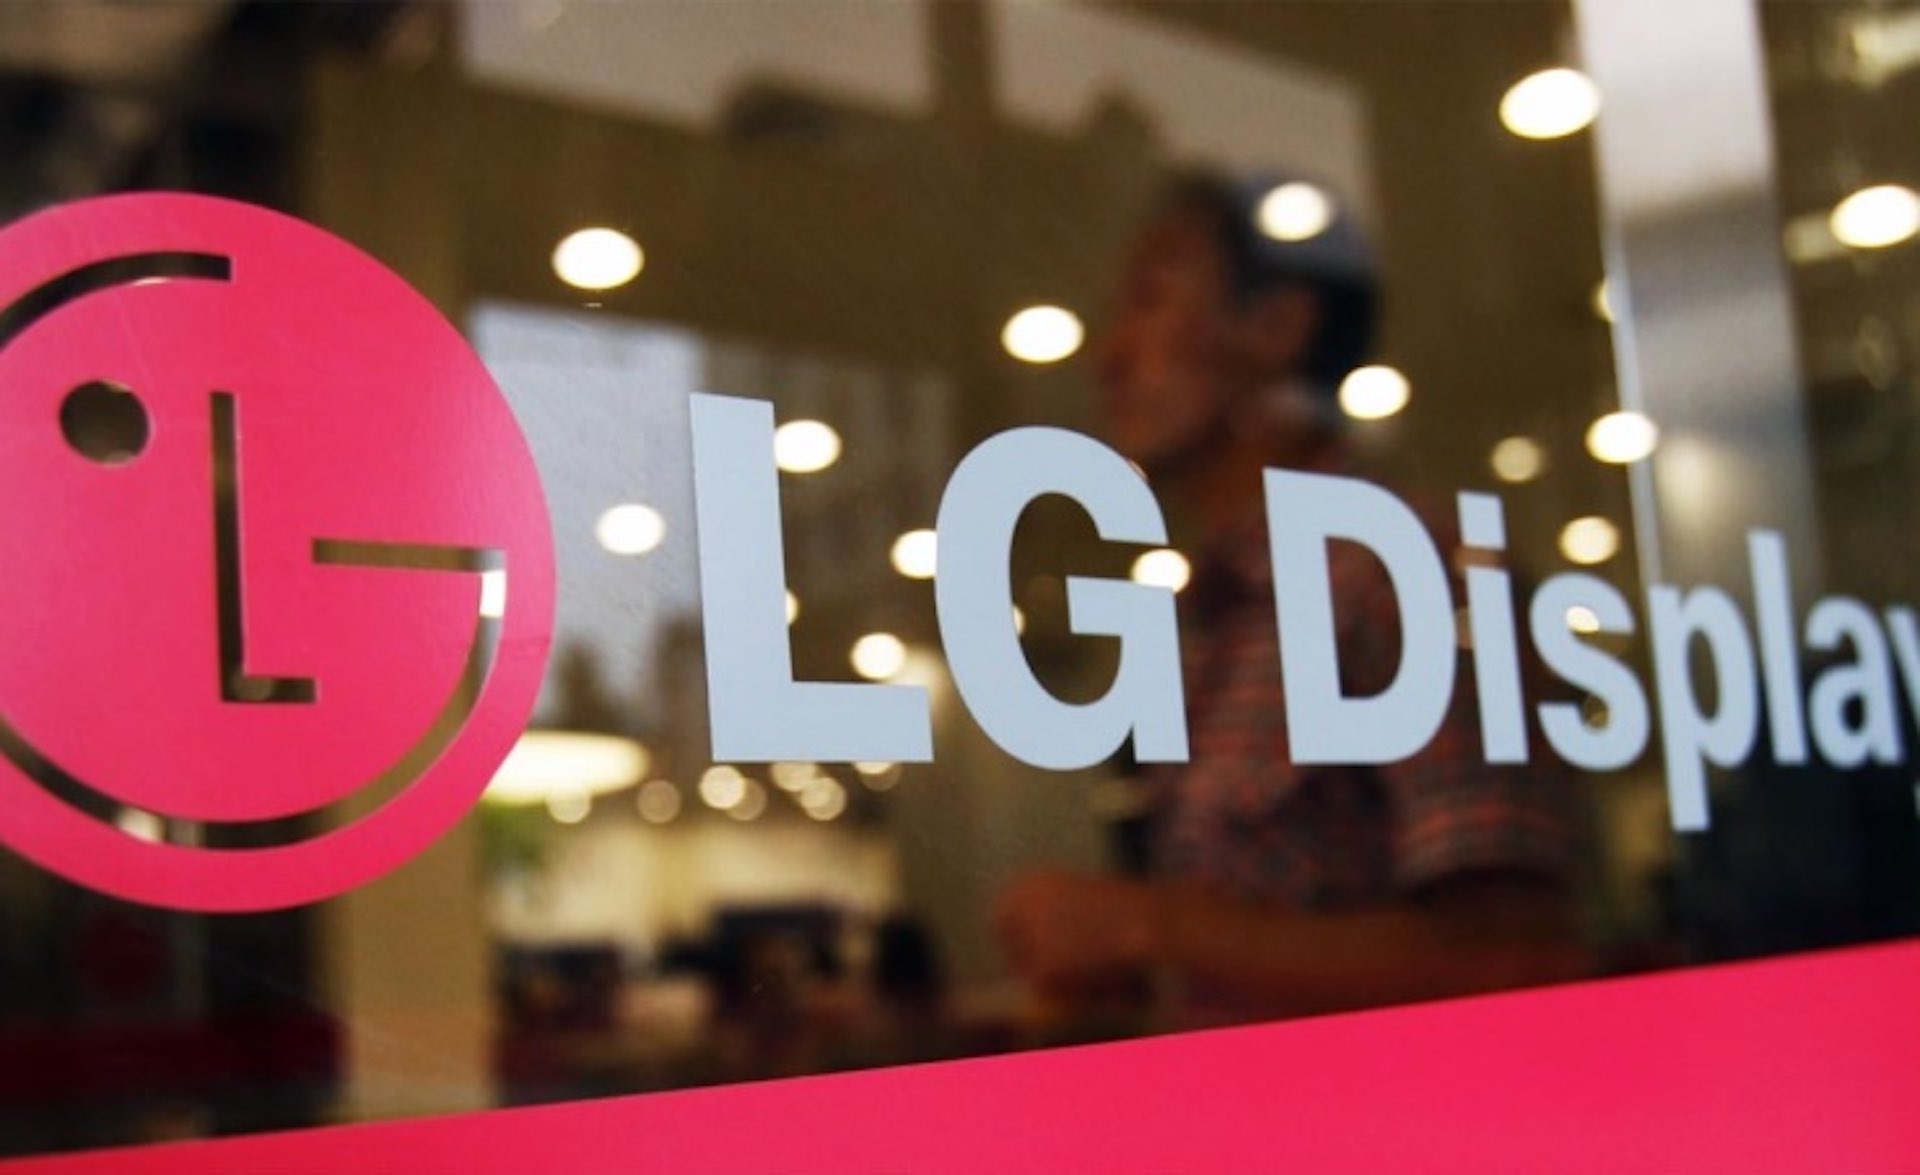 Due to sluggish device sales, LG Display posts a larger-than-expected Q3 loss